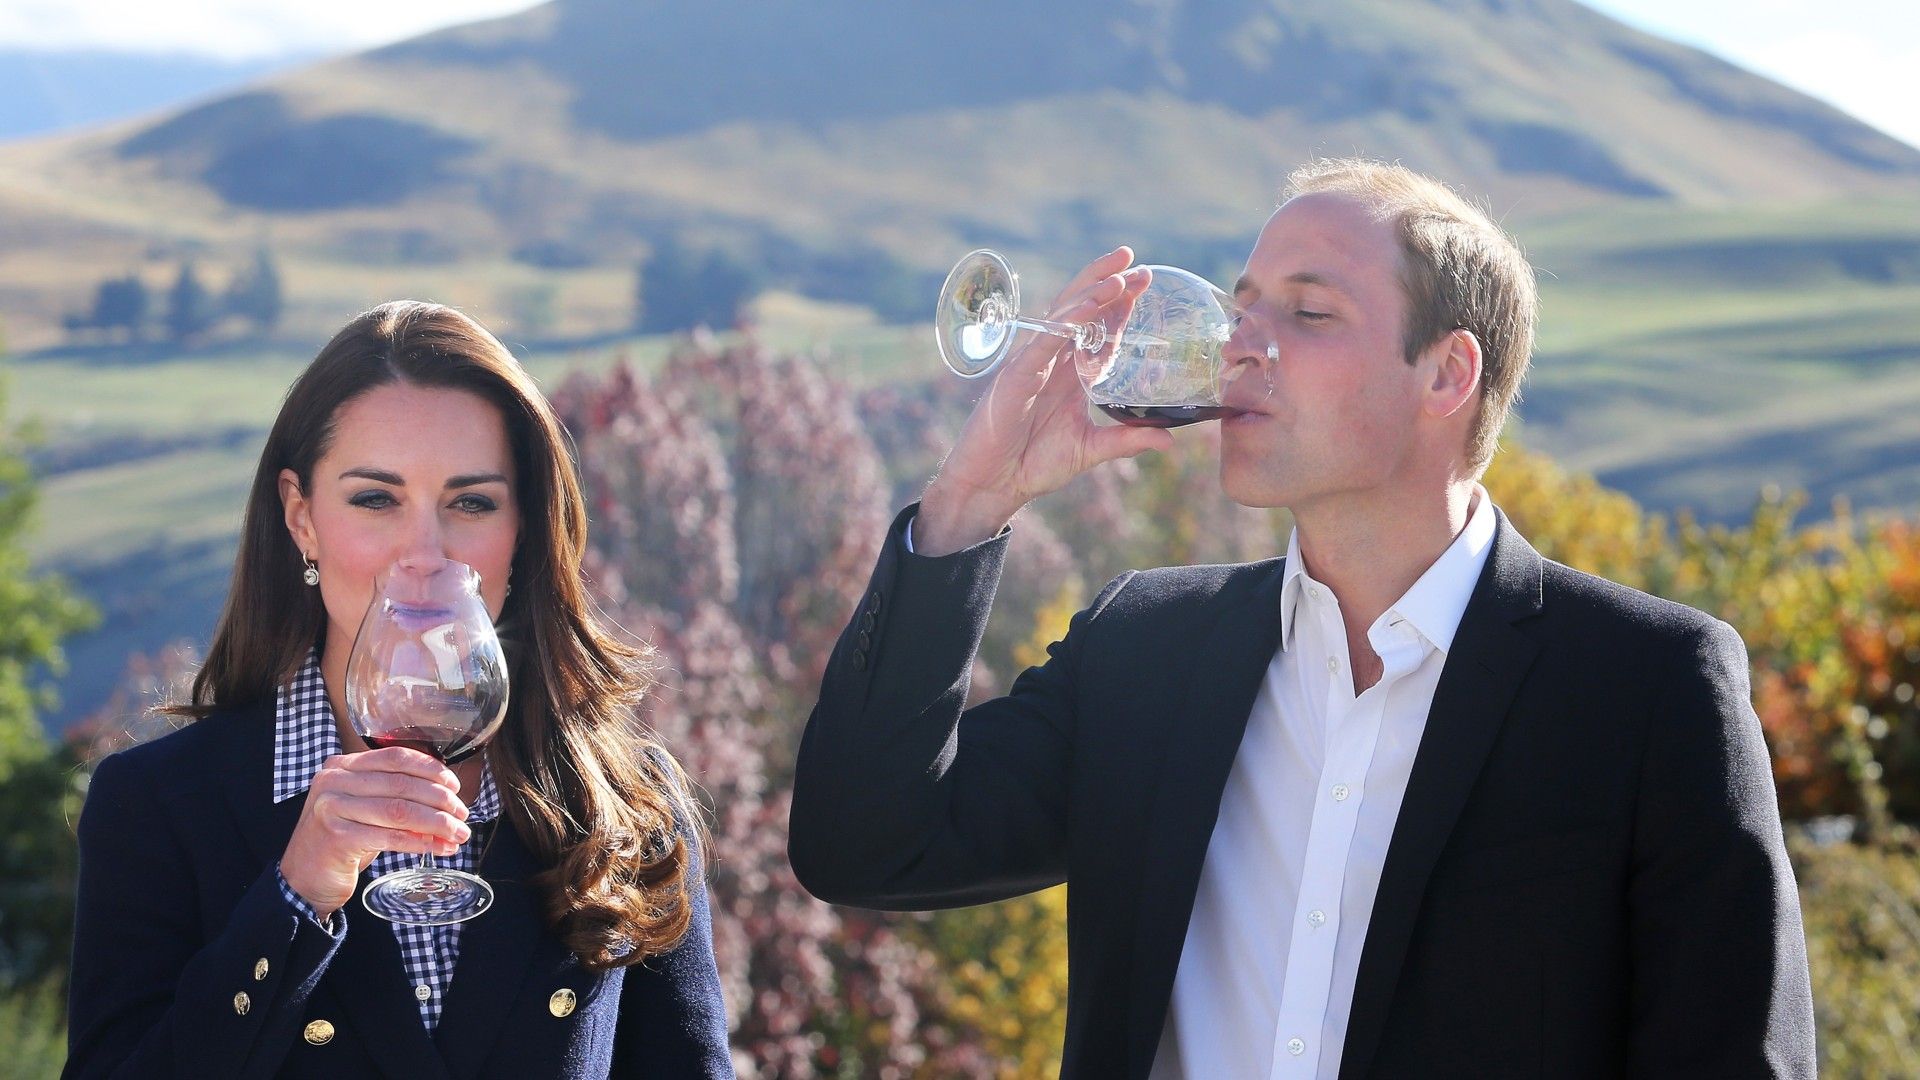 <p>                     A busy day working in New Zealand in 2014 included a trip to... a prestigious vineyard. Oh, the sacrifices these royals have to make.                   </p>                                      <p>                     In fairness to the pair, they'd had a packed itinerary and had attended church services and helped coach a kids’ rugby game earlier that same day.                   </p>                                      <p>                     They stopped off at the Amisfield Winery and Bistro in Arrowtown, near Queenstown where they got to sample one of the most famous wines, the Amisfield Pinot Noir 2011.                   </p>